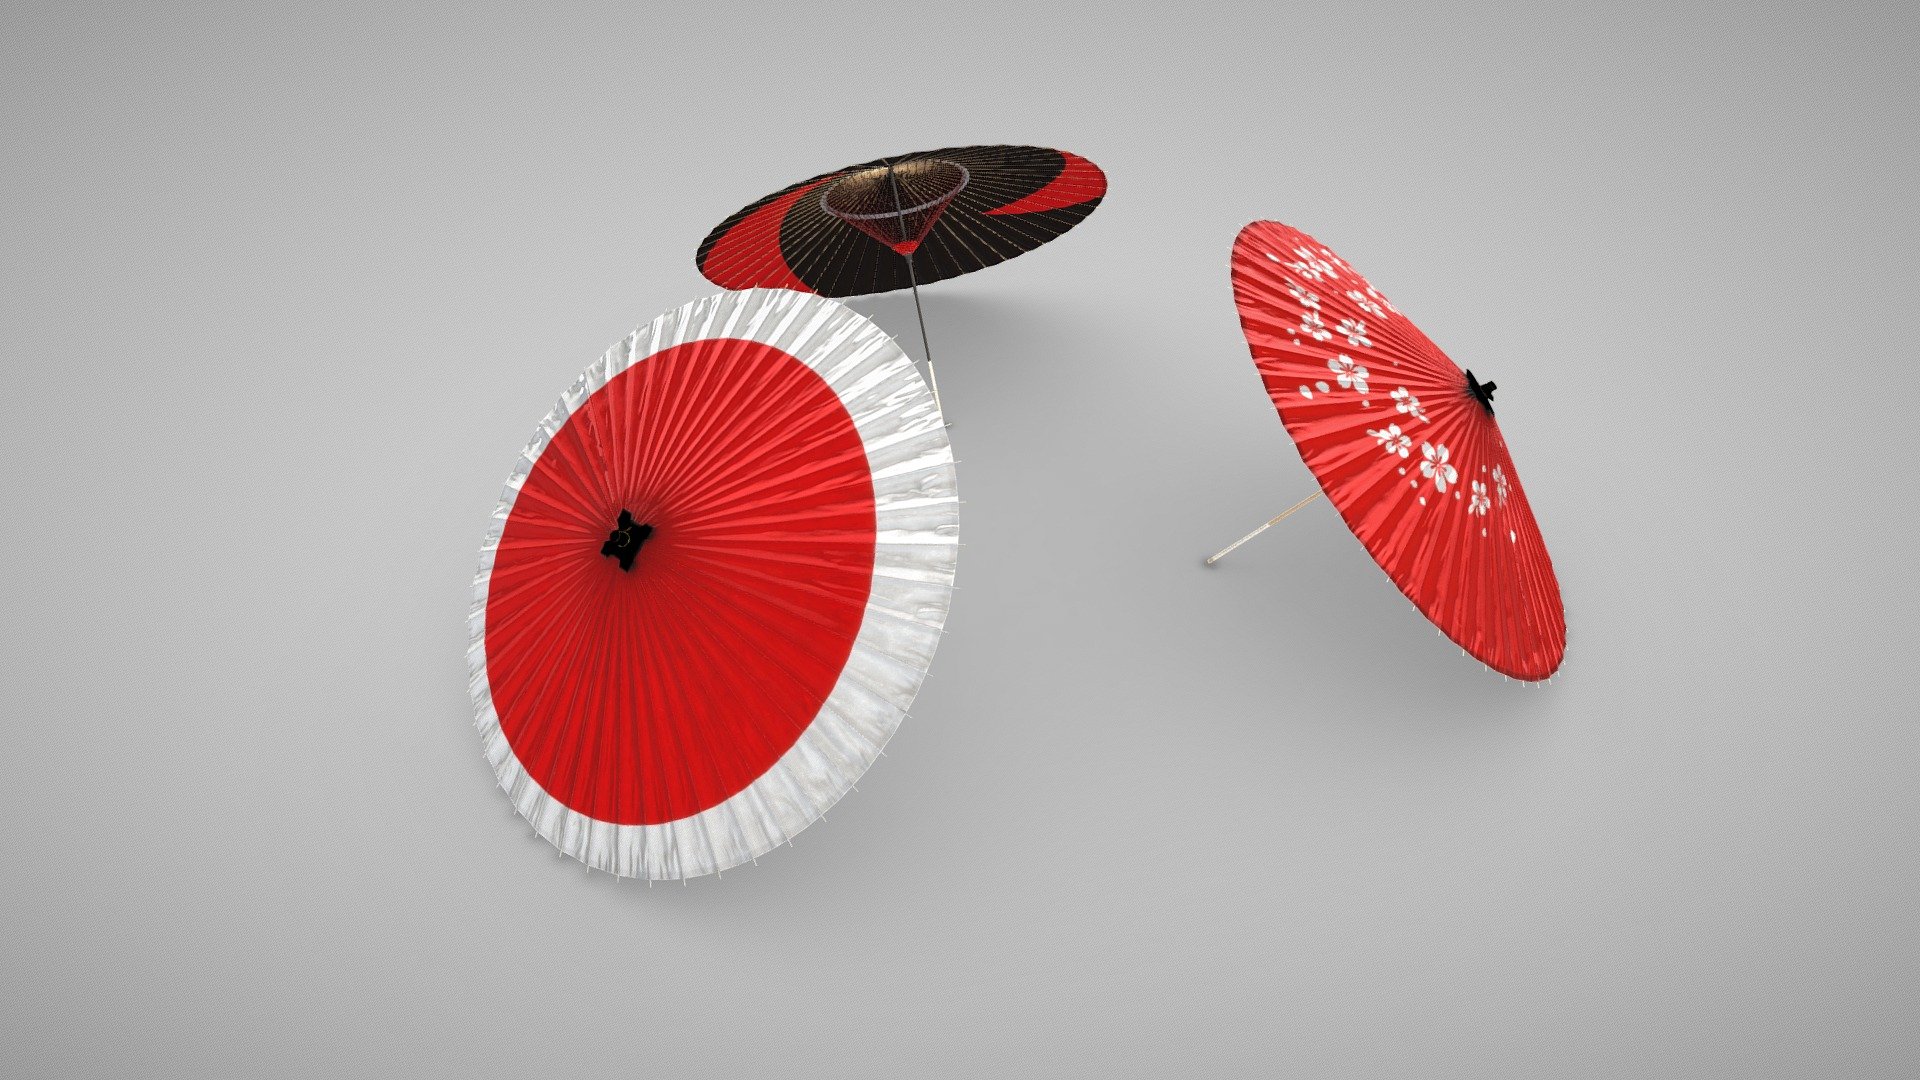 Traditional Japanese umbrella.

WAGASA is a general term for umbrellas made of natural materials such as bamboo, wood, and yarn, with Japanese paper attached to the framework 3d model